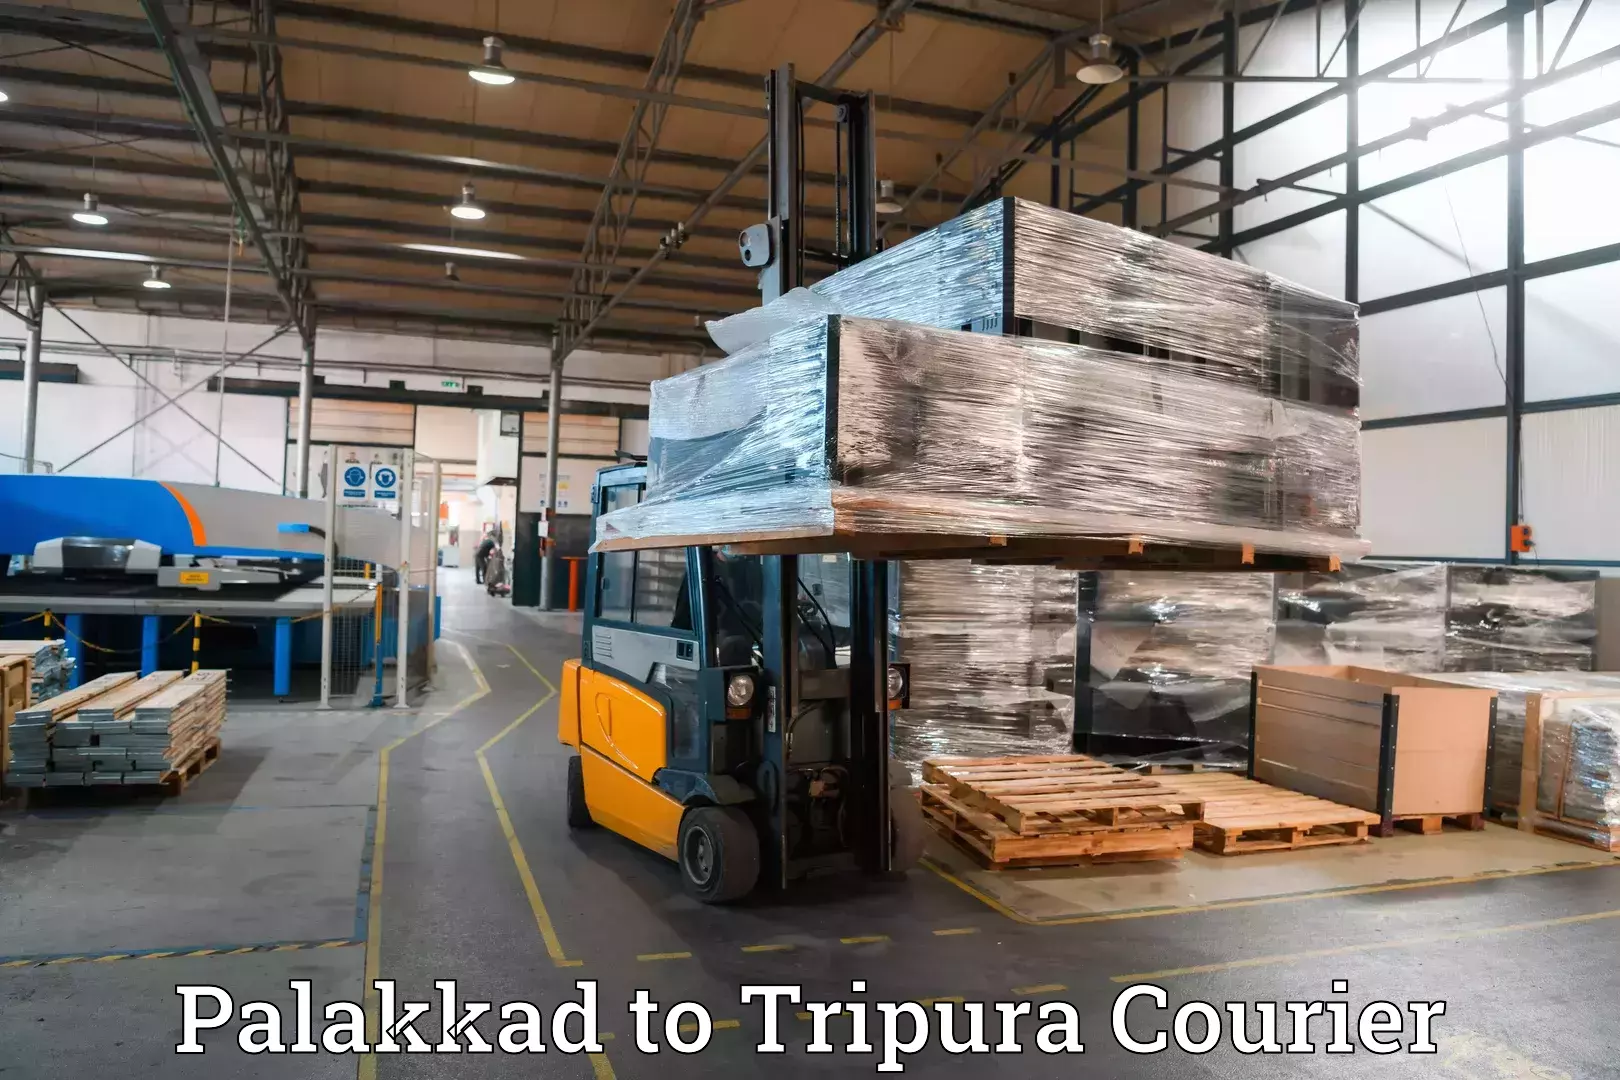 Luggage delivery system Palakkad to Udaipur Tripura